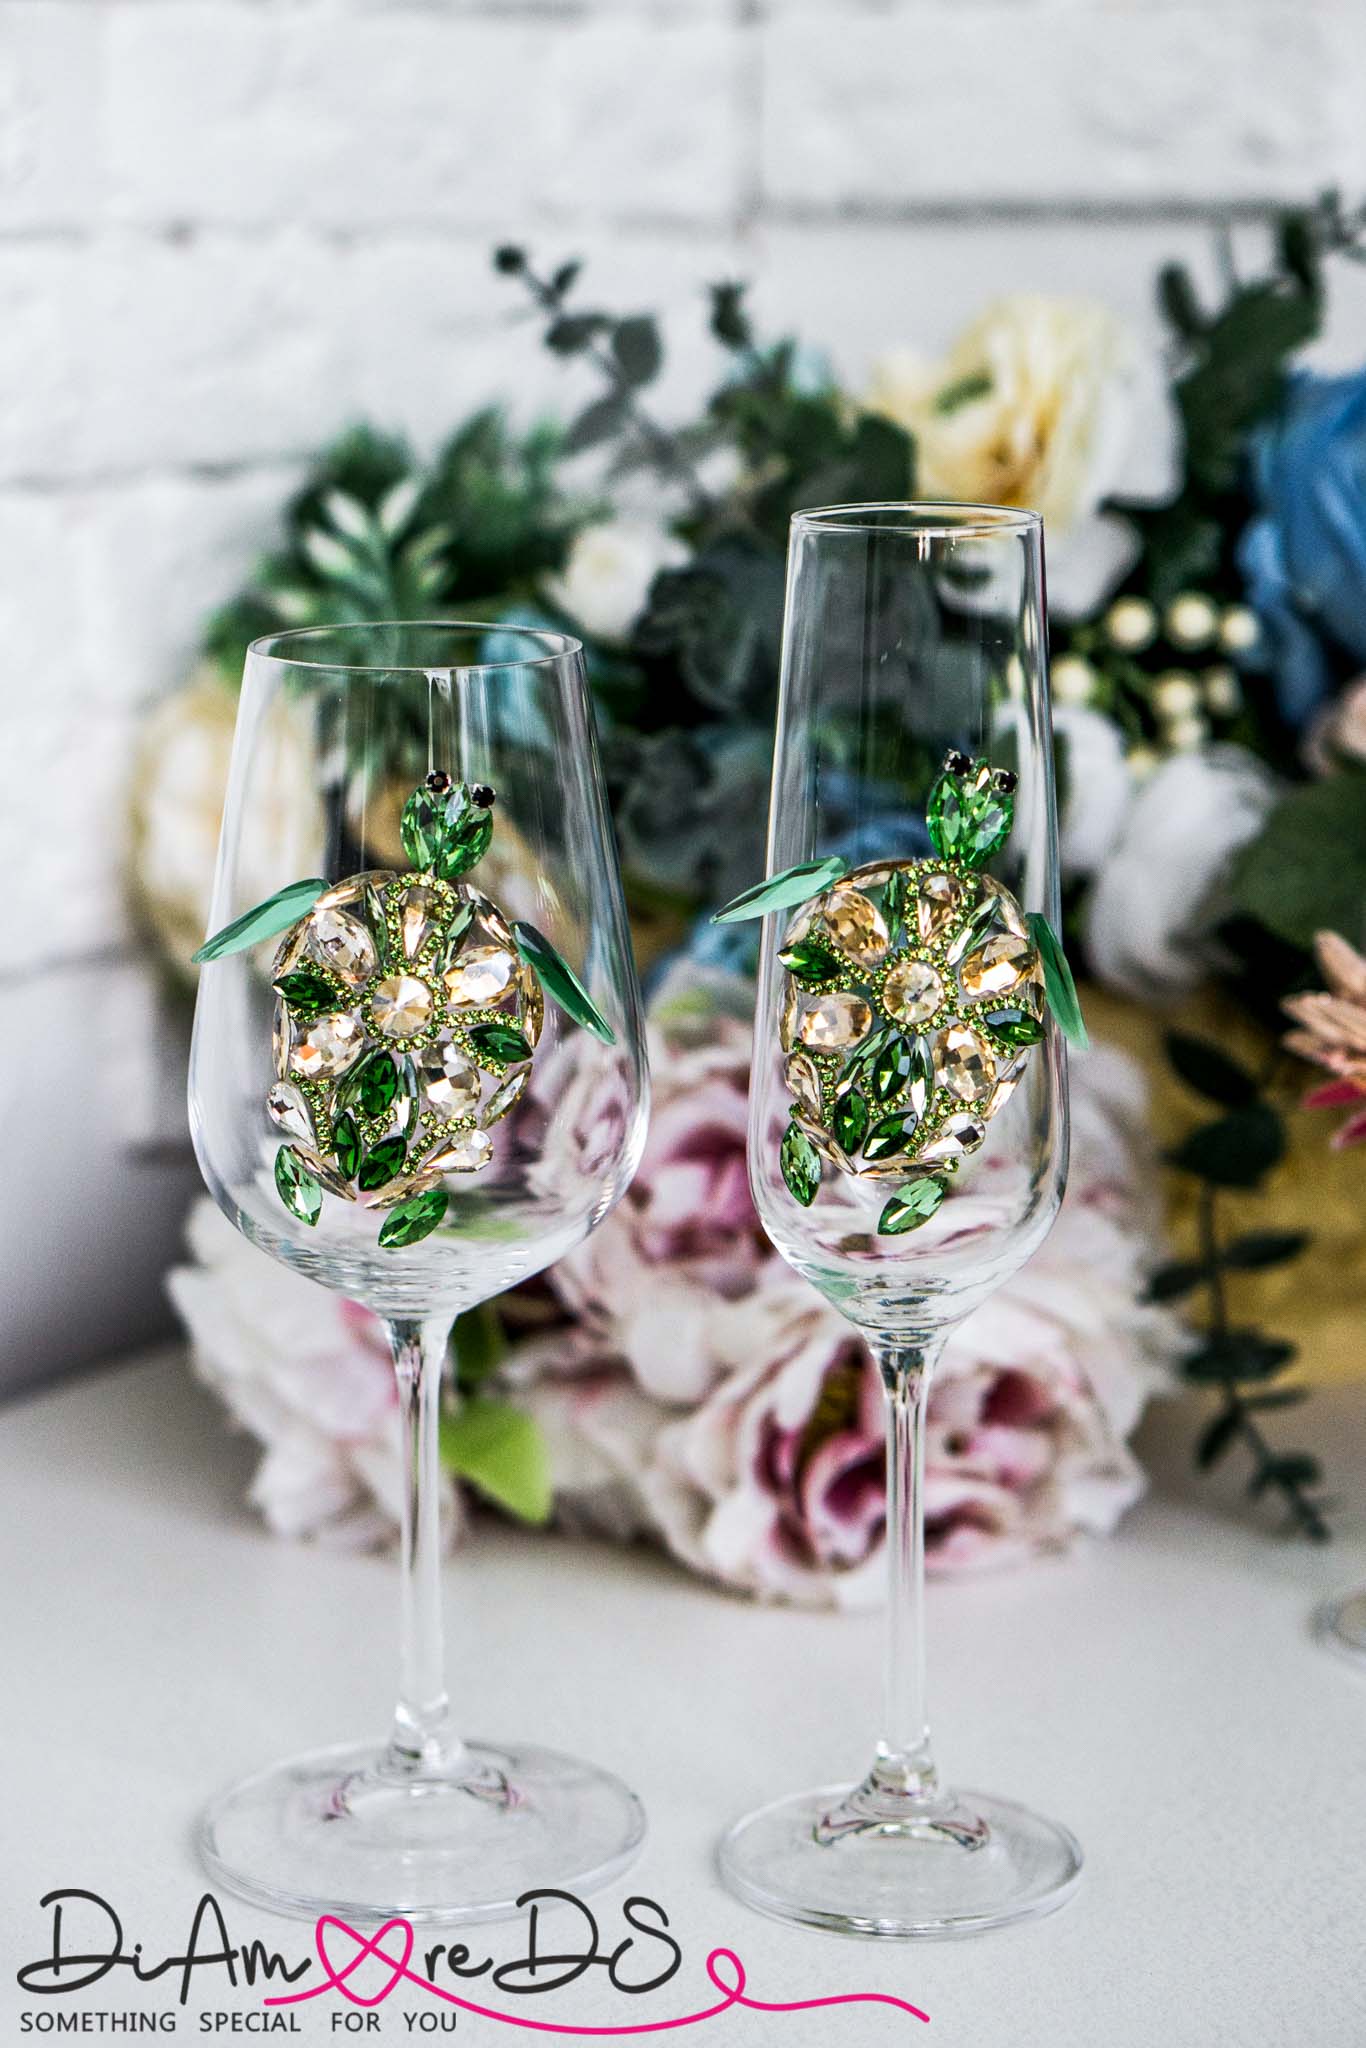 Pair of sea turtle wine glasses with exquisite green crystal decorations, set against a floral arrangement backdrop